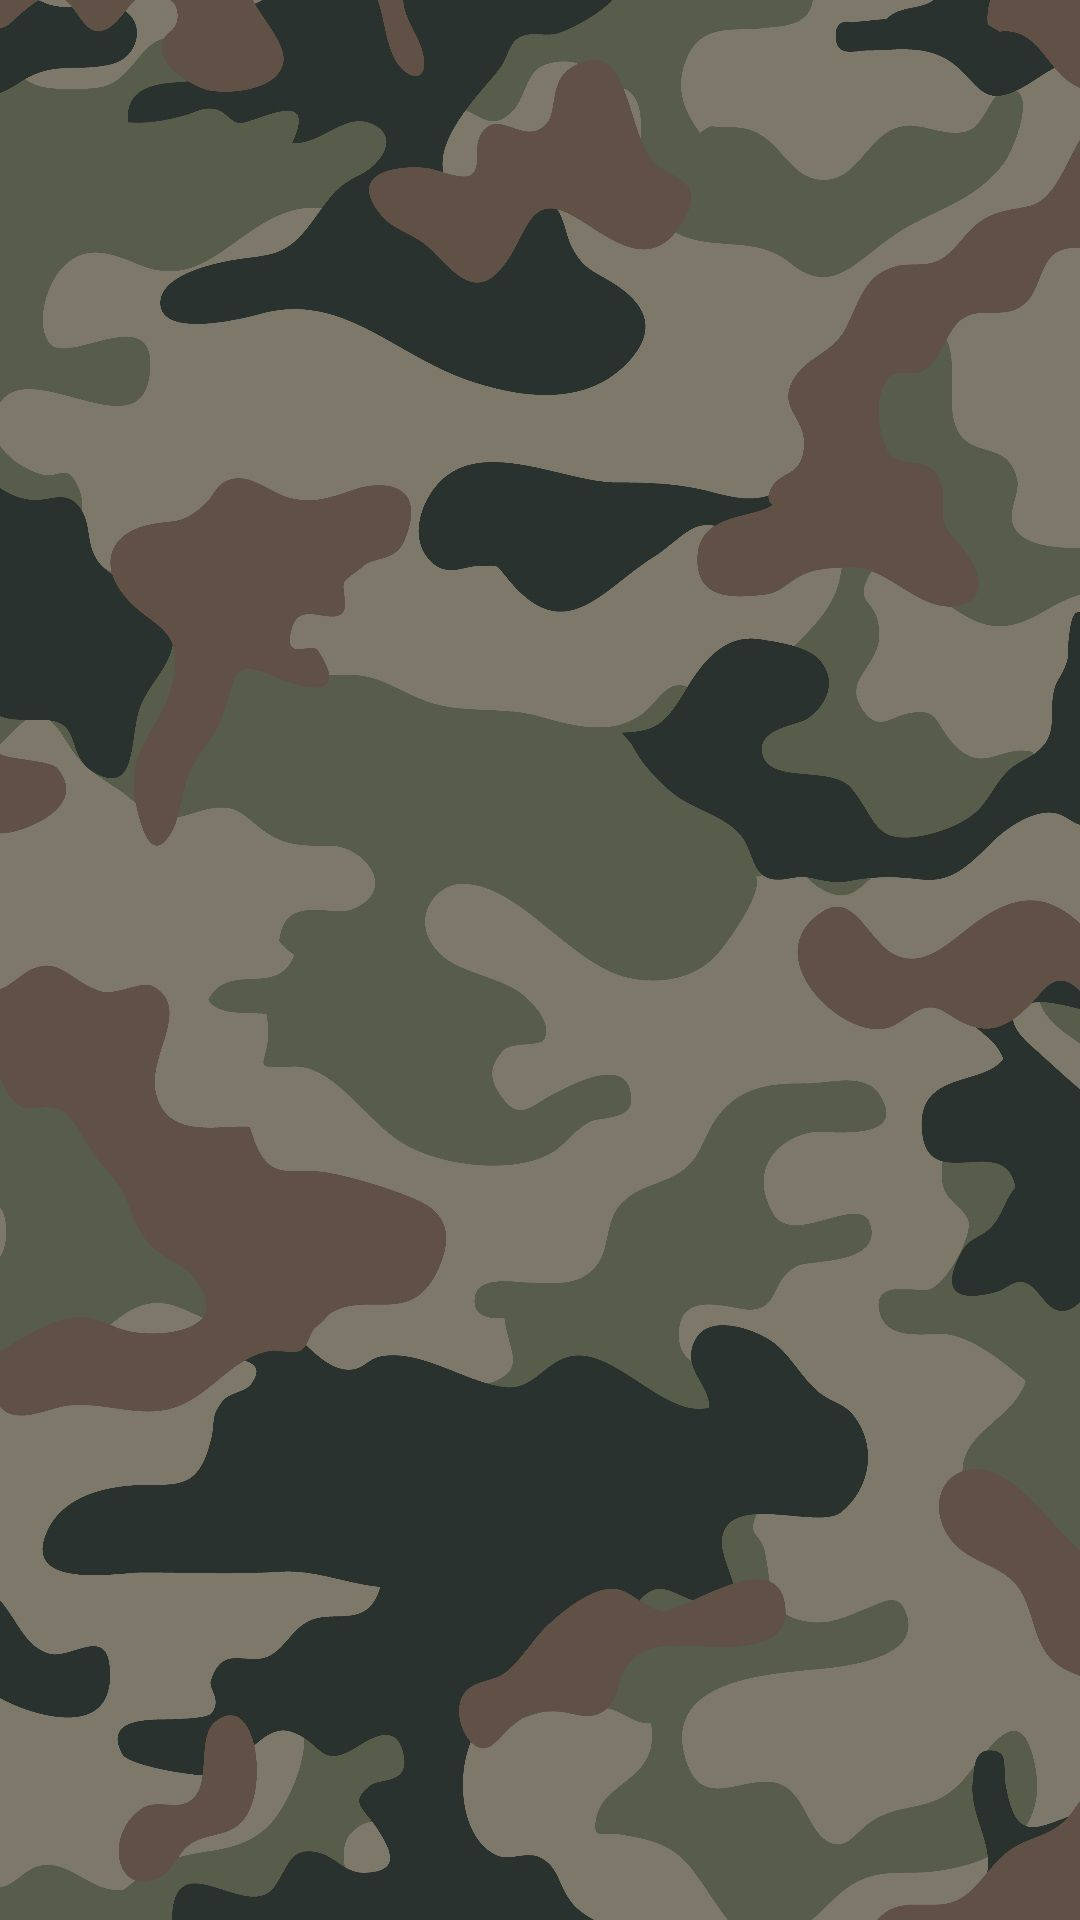 Digital Typical Classic Camo Background